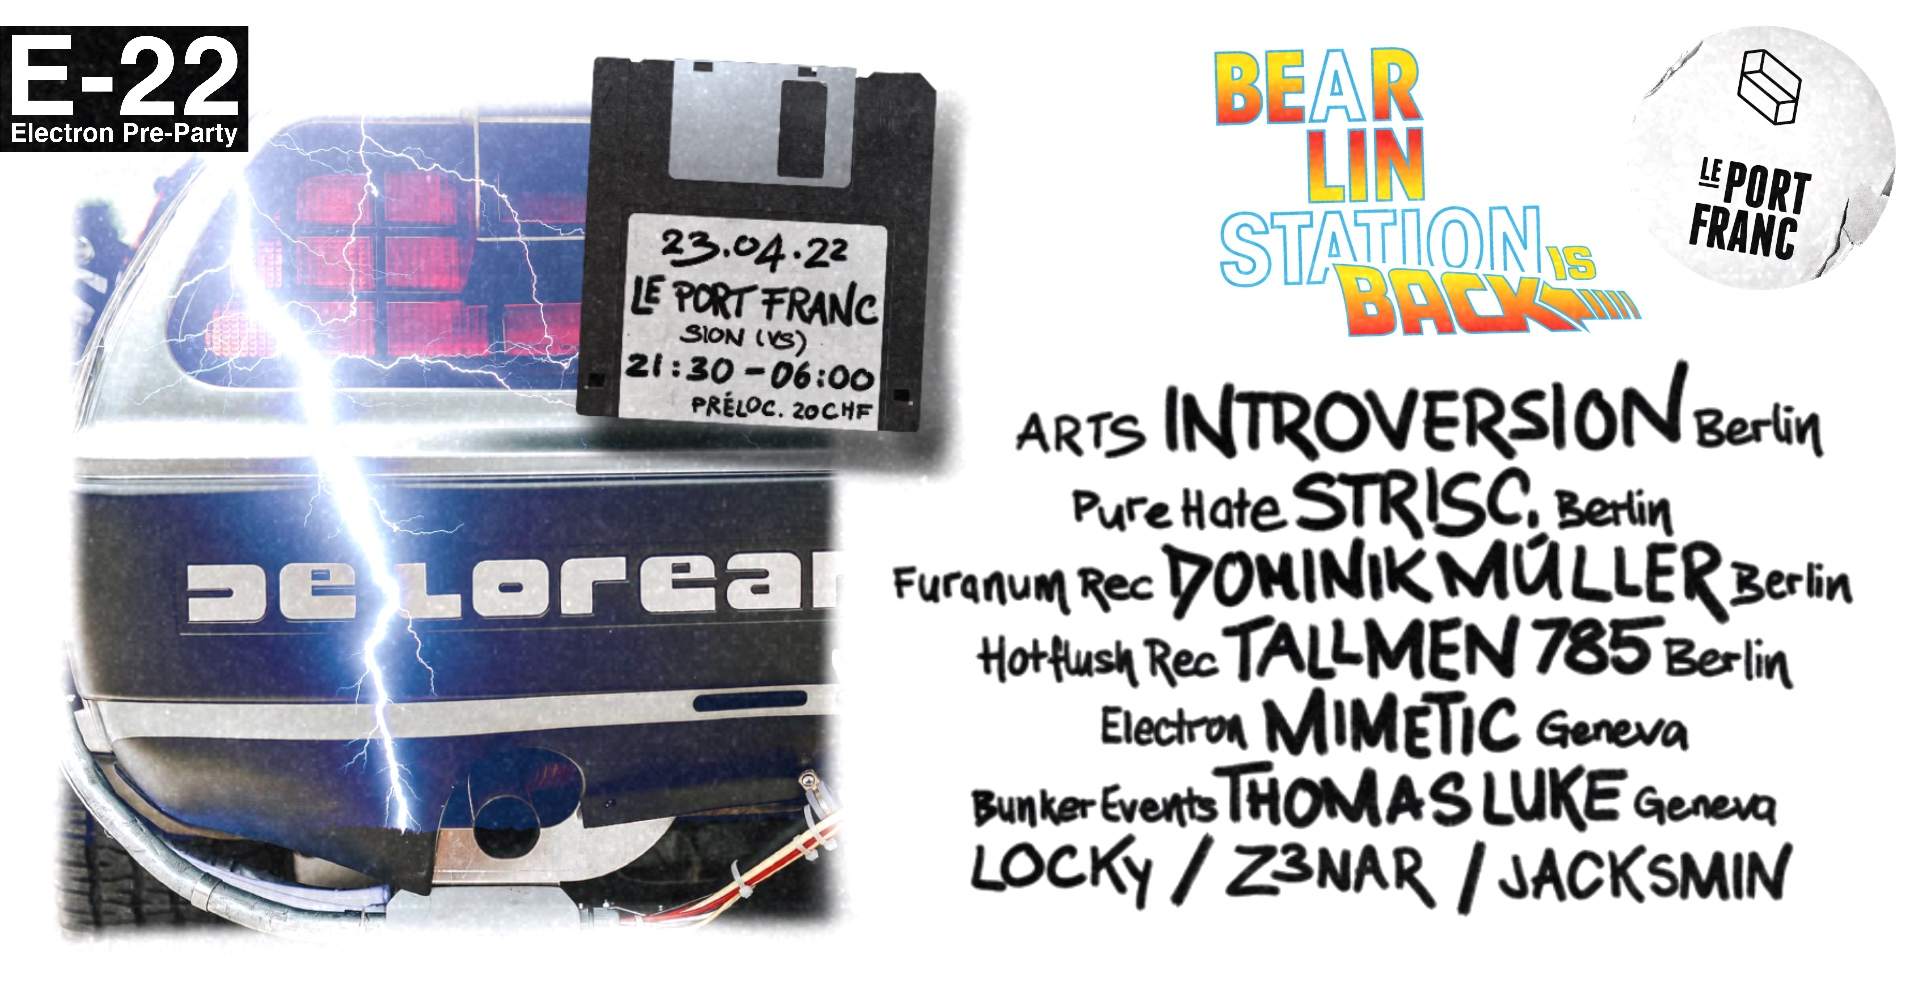 BEAR'LIN STATION IS BACK, powered by ELECTRON FESTIVAL x Le Port Franc - フライヤー表